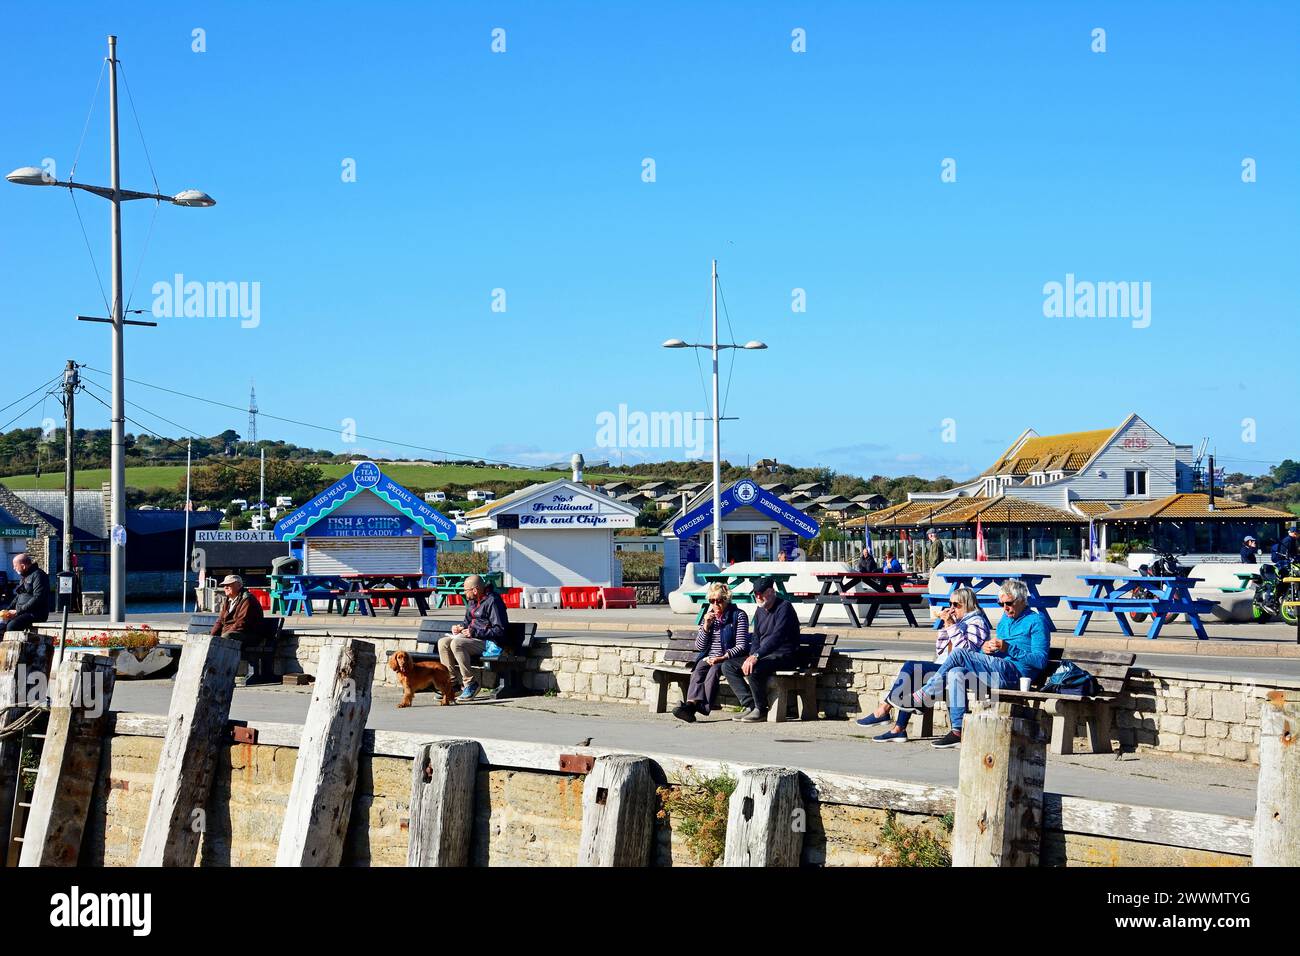 Tourists relaxing on benches in the harbour area with The Rise restaurant and snack kiosks to the rear, West Bay, Dorset, UK. Stock Photo